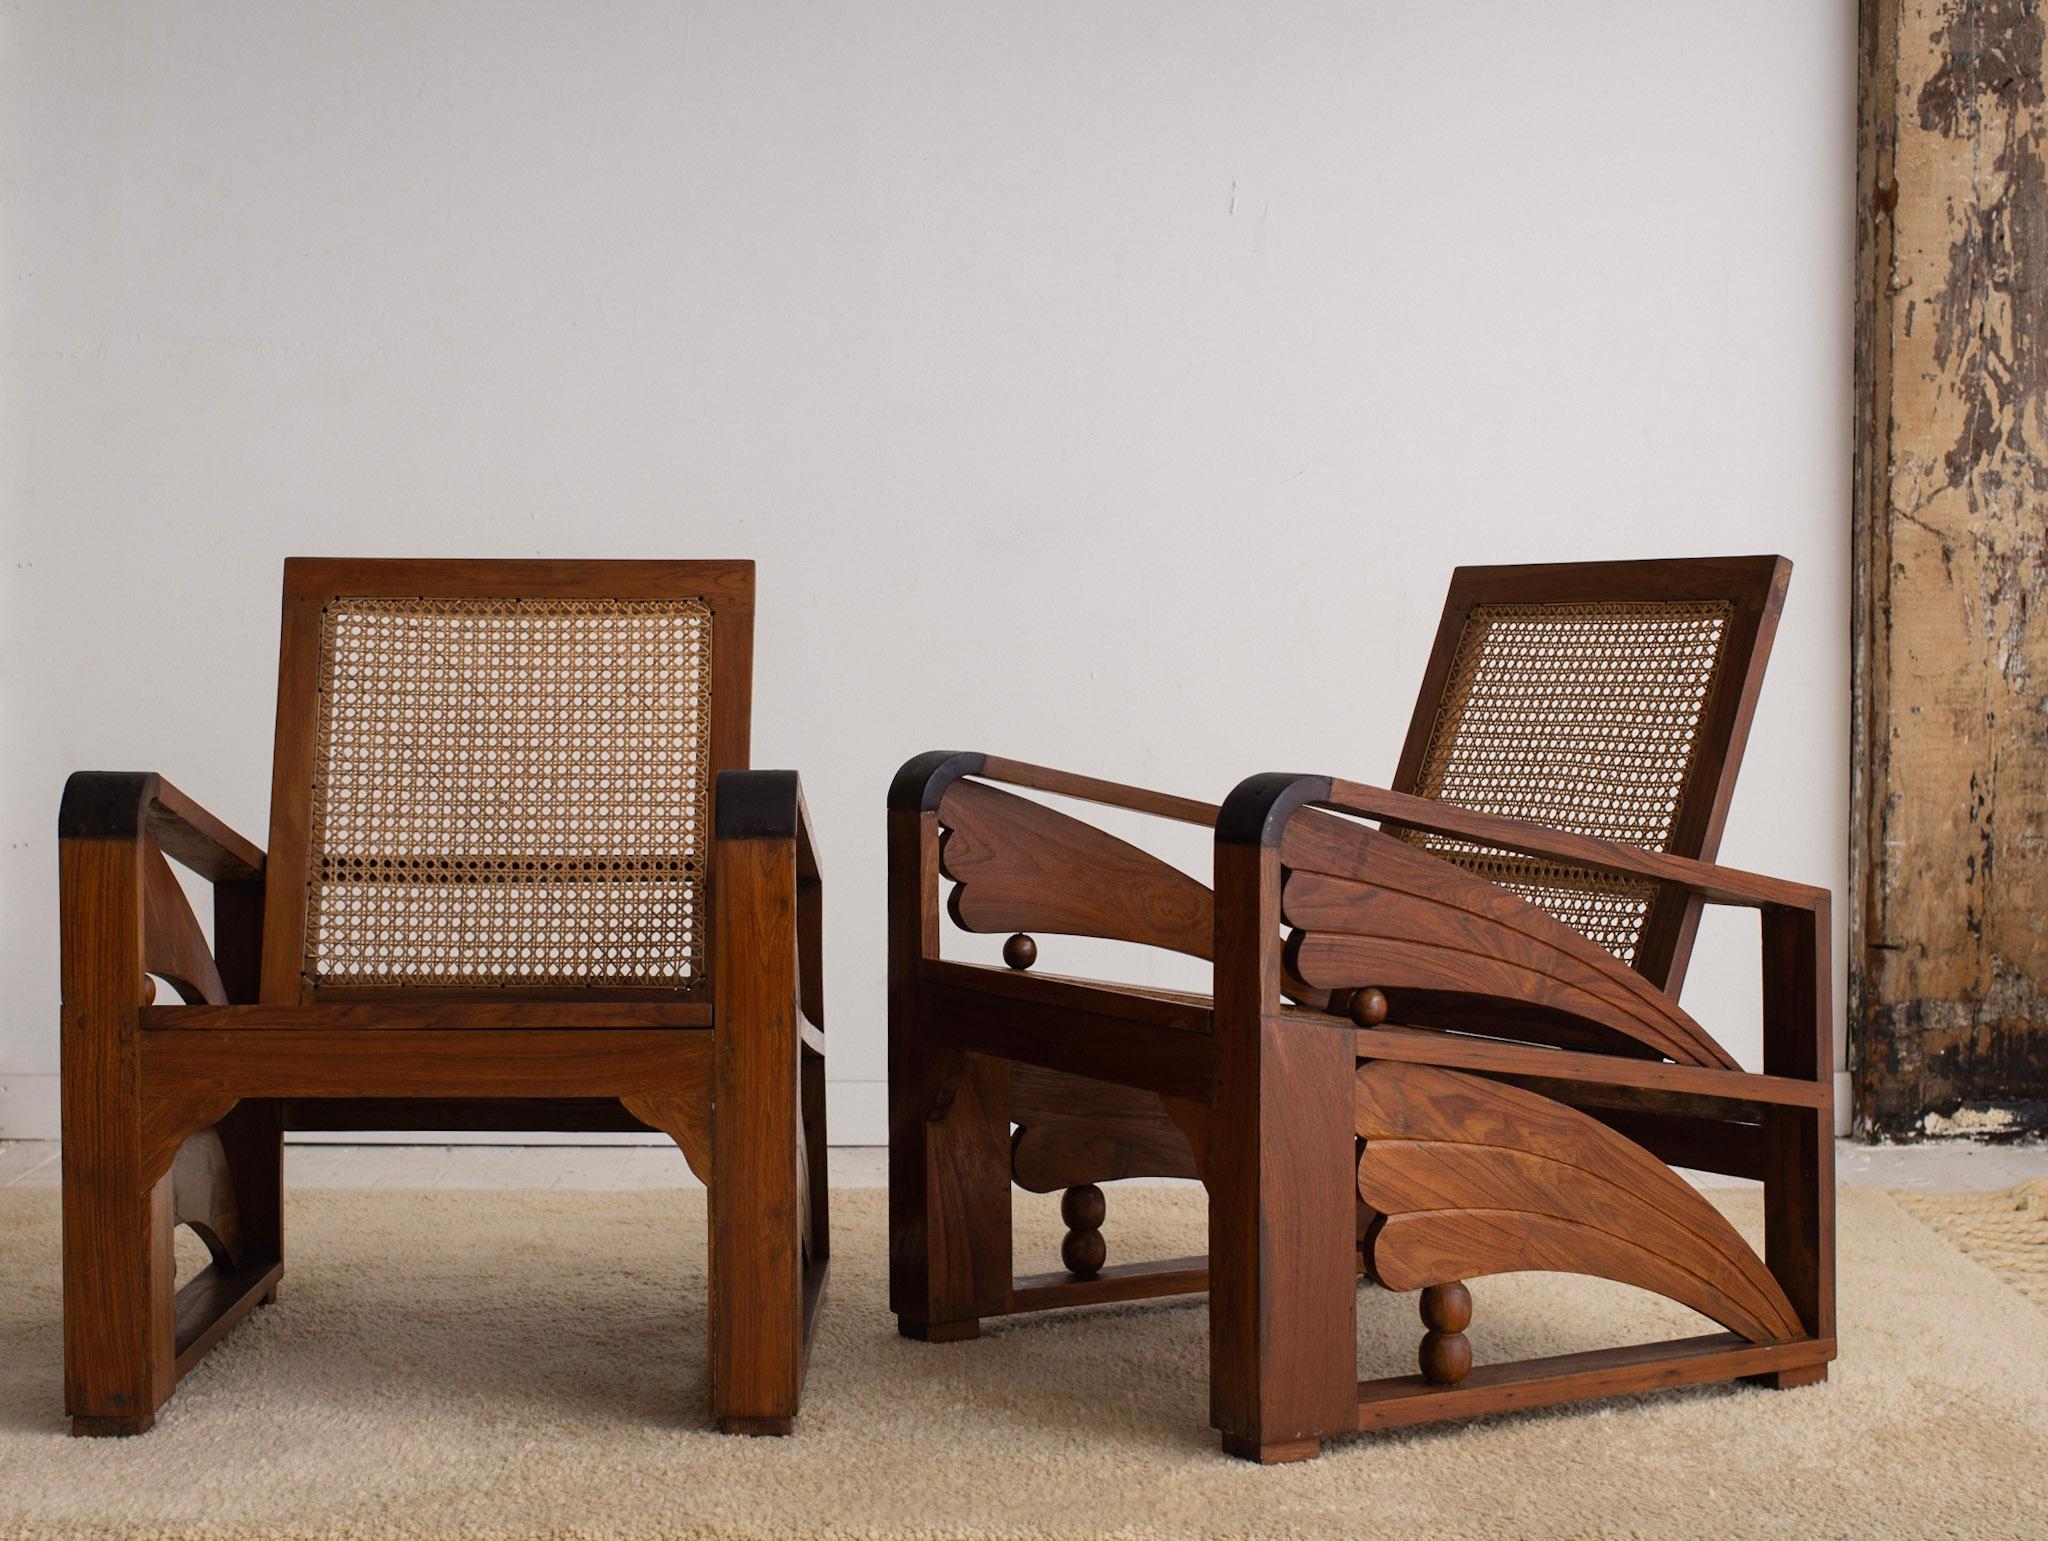 20th Century British Colonial Art Deco Teak and Cane Chairs, a Pair